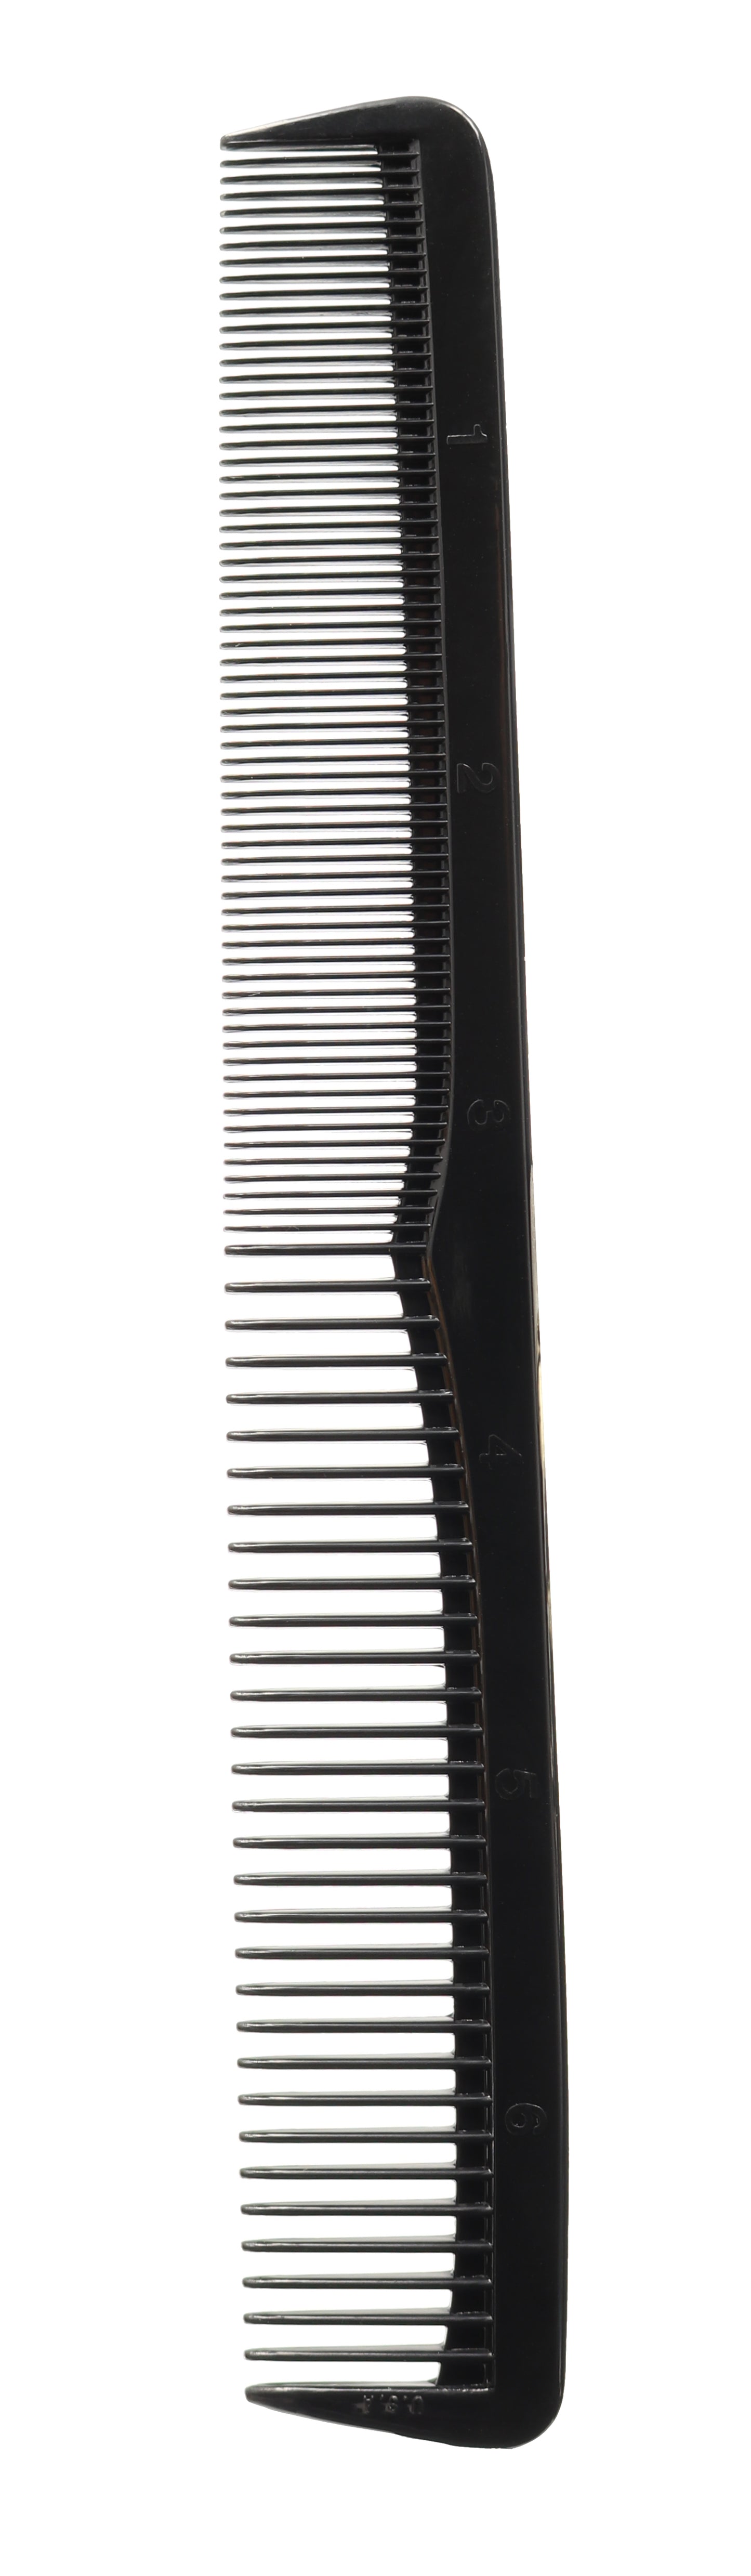 Allegro Combs 400 Barbers Cutting Combs All Purpose Combs Wide Fine Tooth Black Combs. 12 Pk